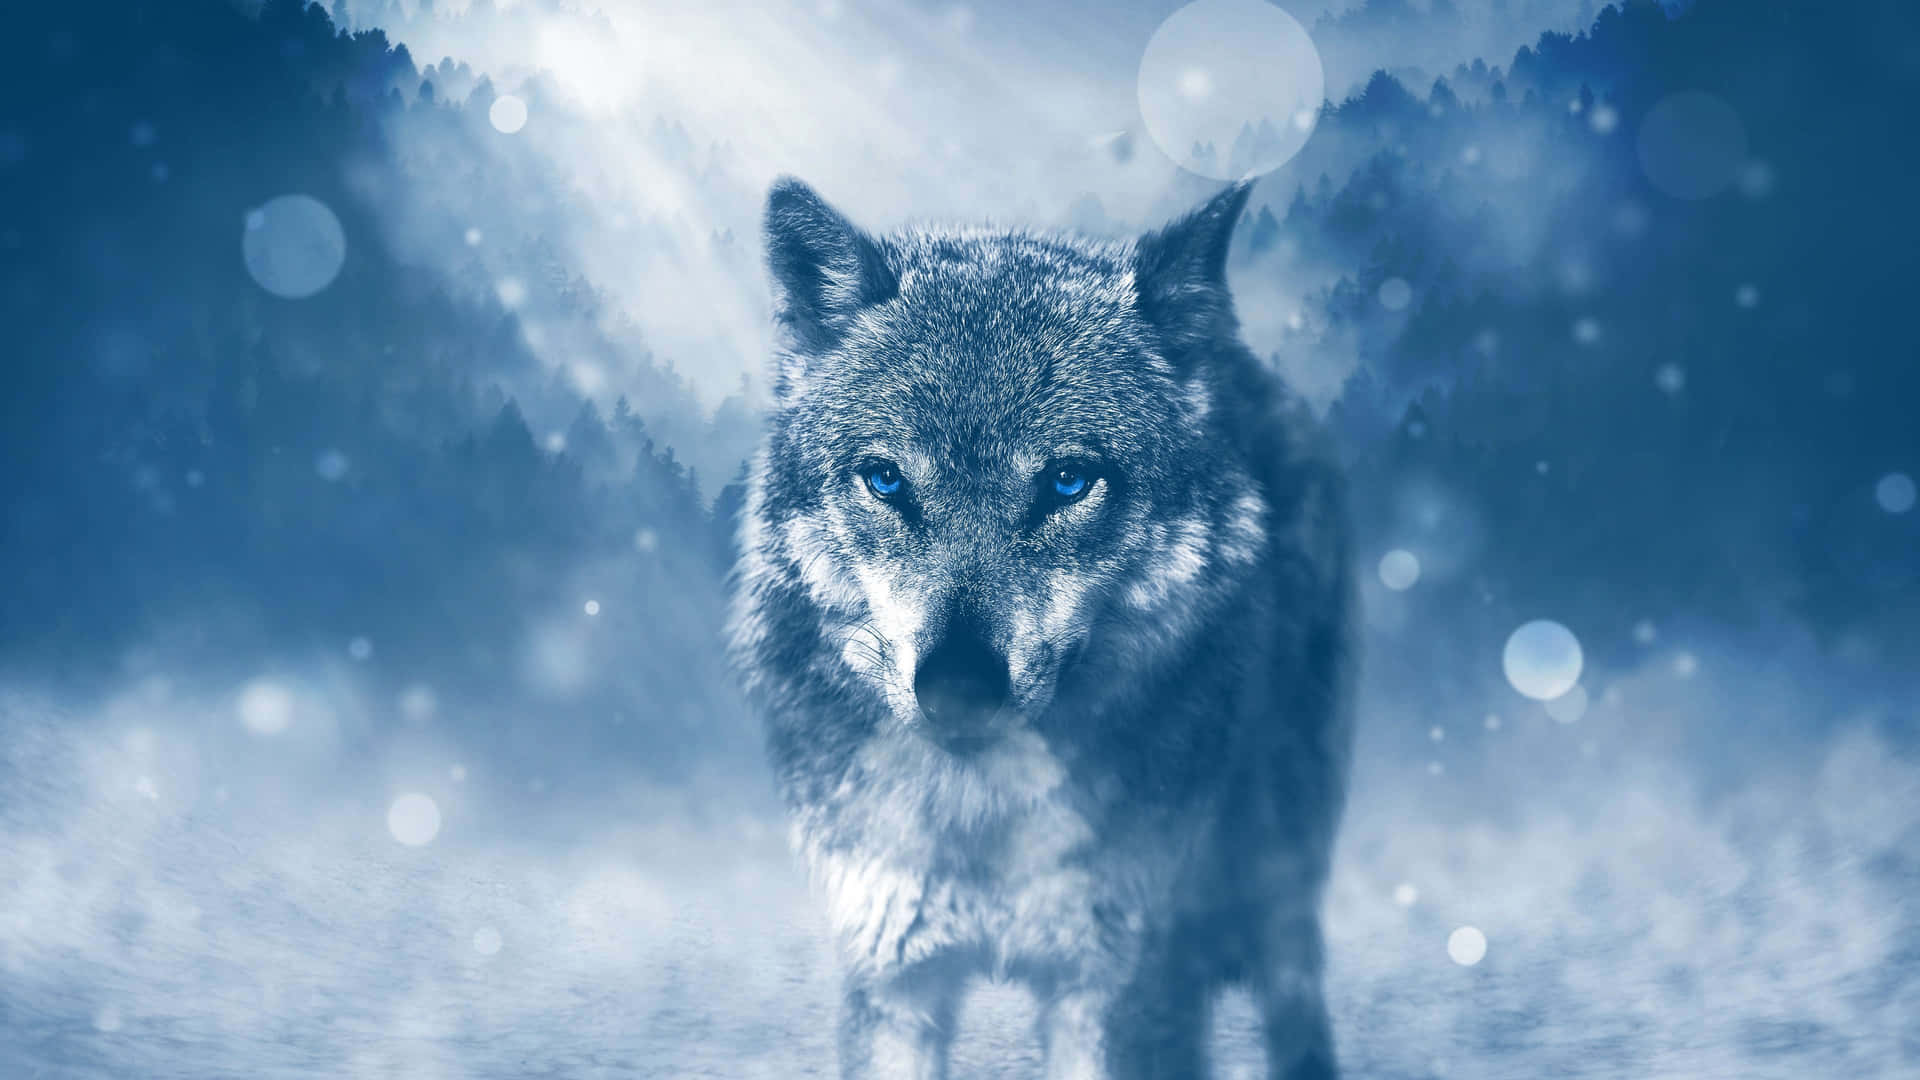 "The Majesty of the Pretty Wolf" Wallpaper